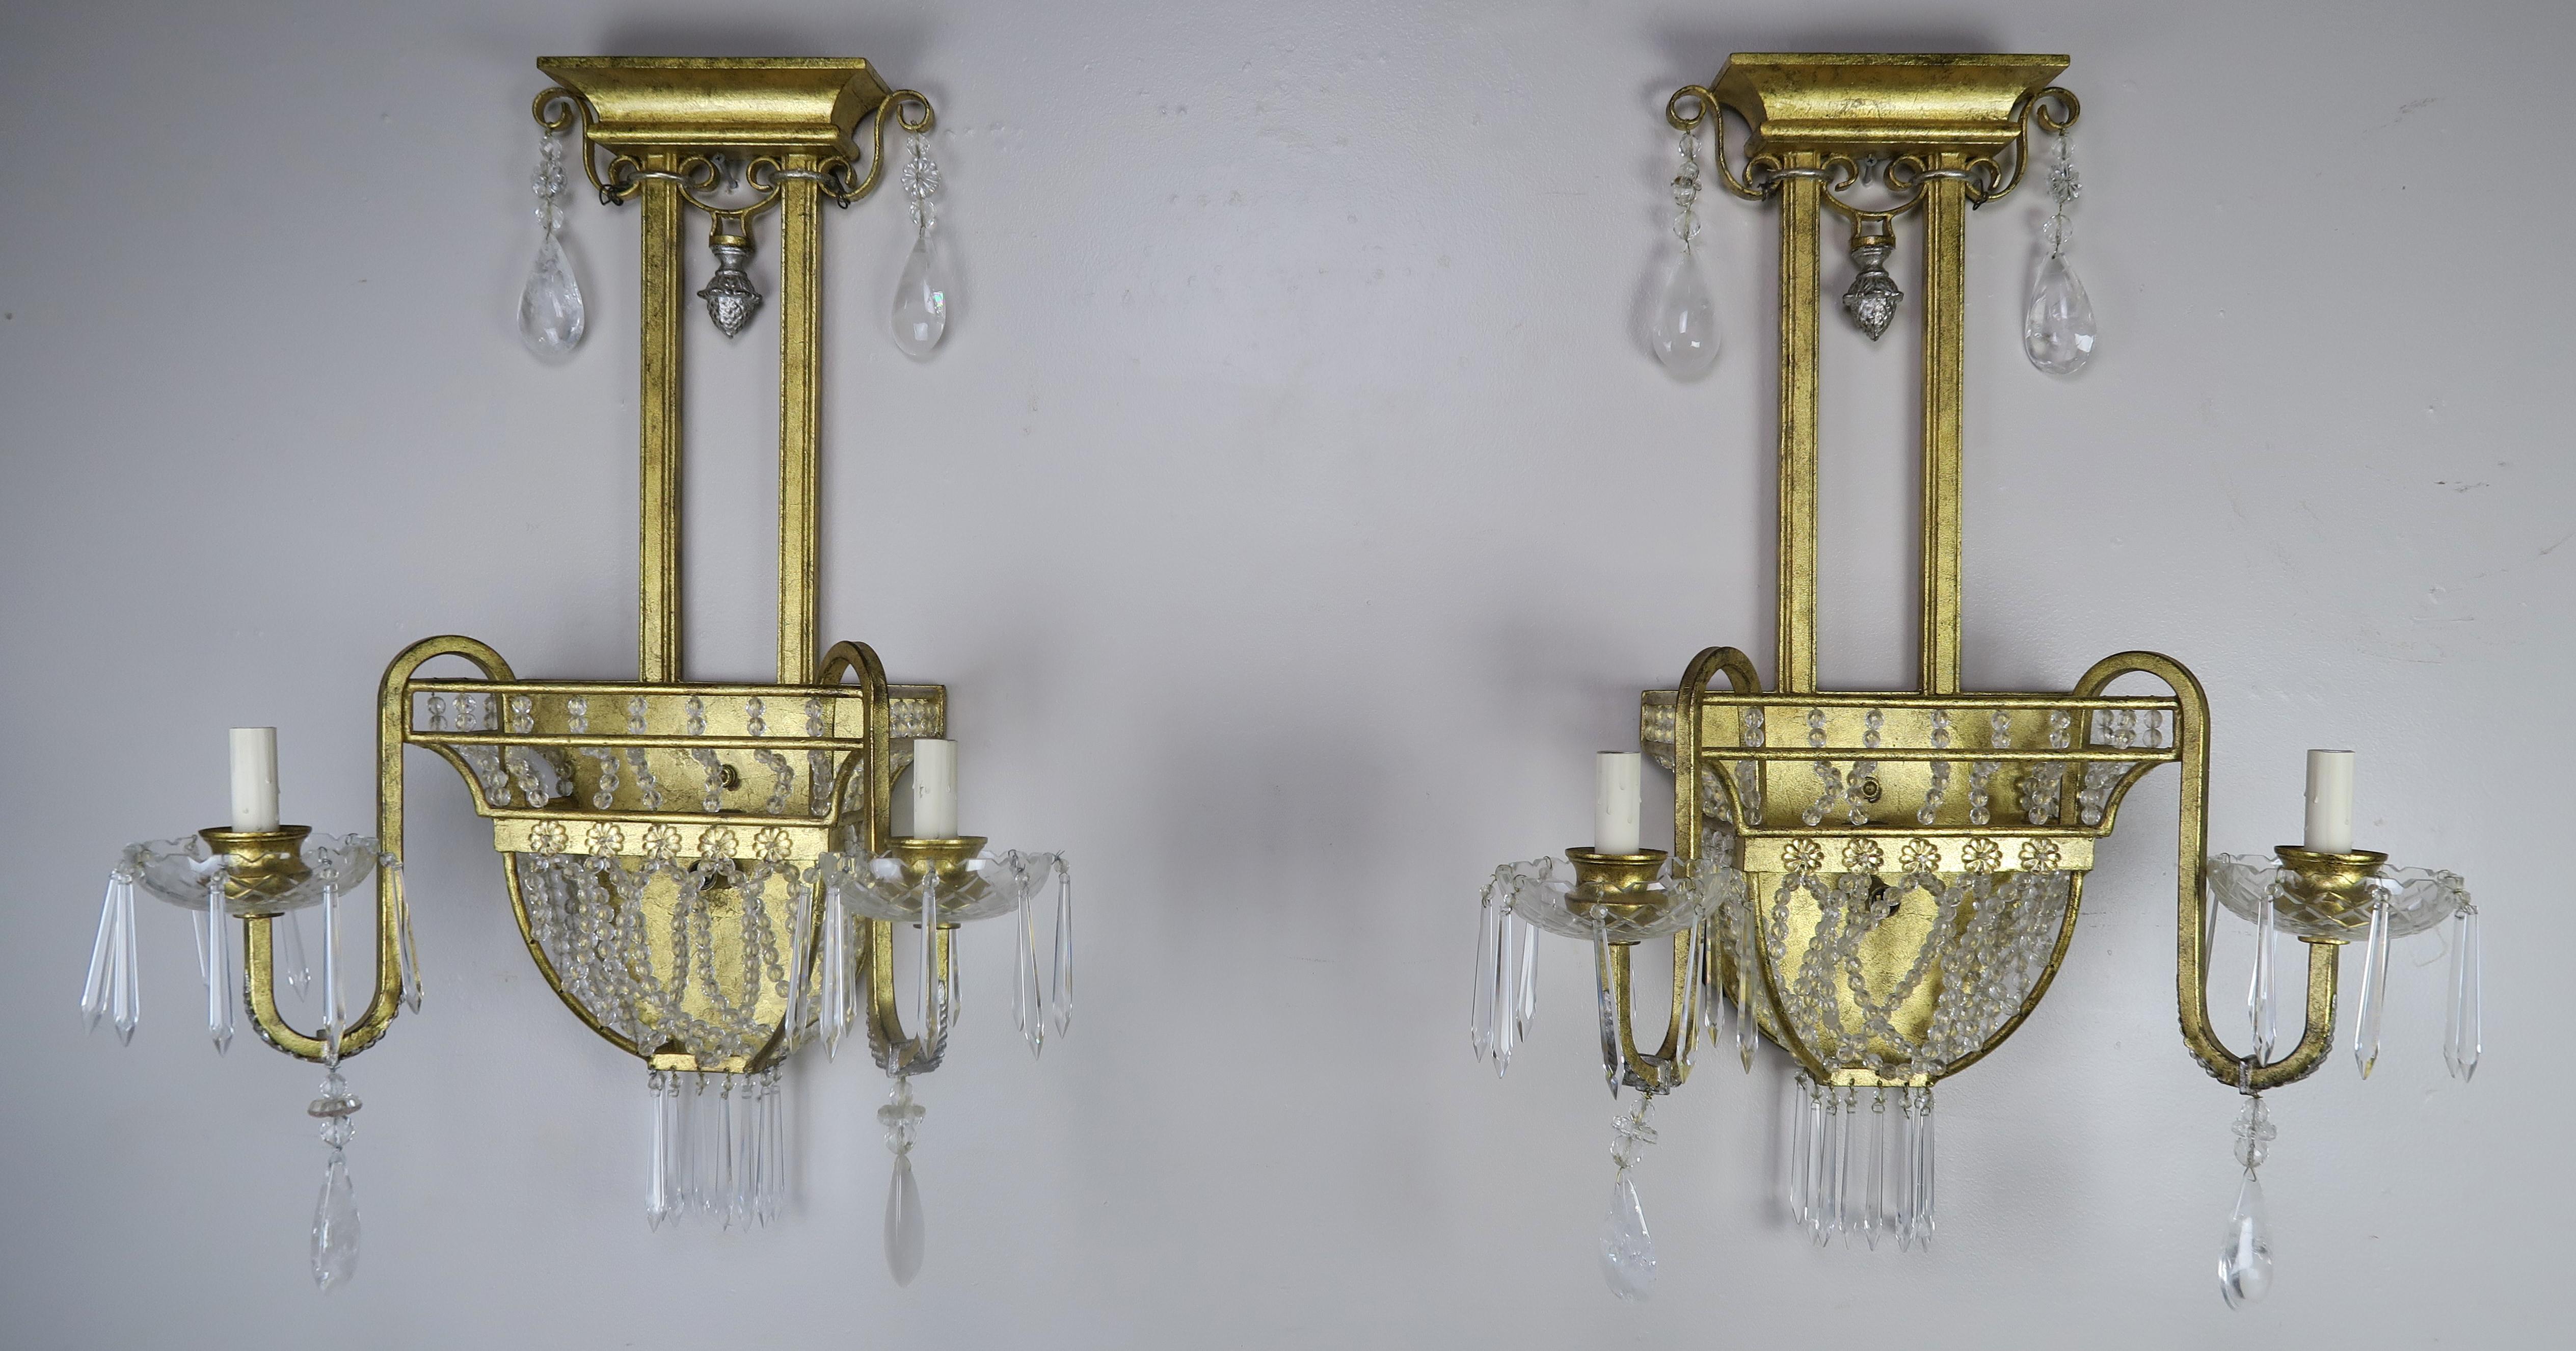 Pair of early 20th century 2-light cast bronze and rock crystal sconces. The sconces are detailed with strands of tiny crystal beads that create an 